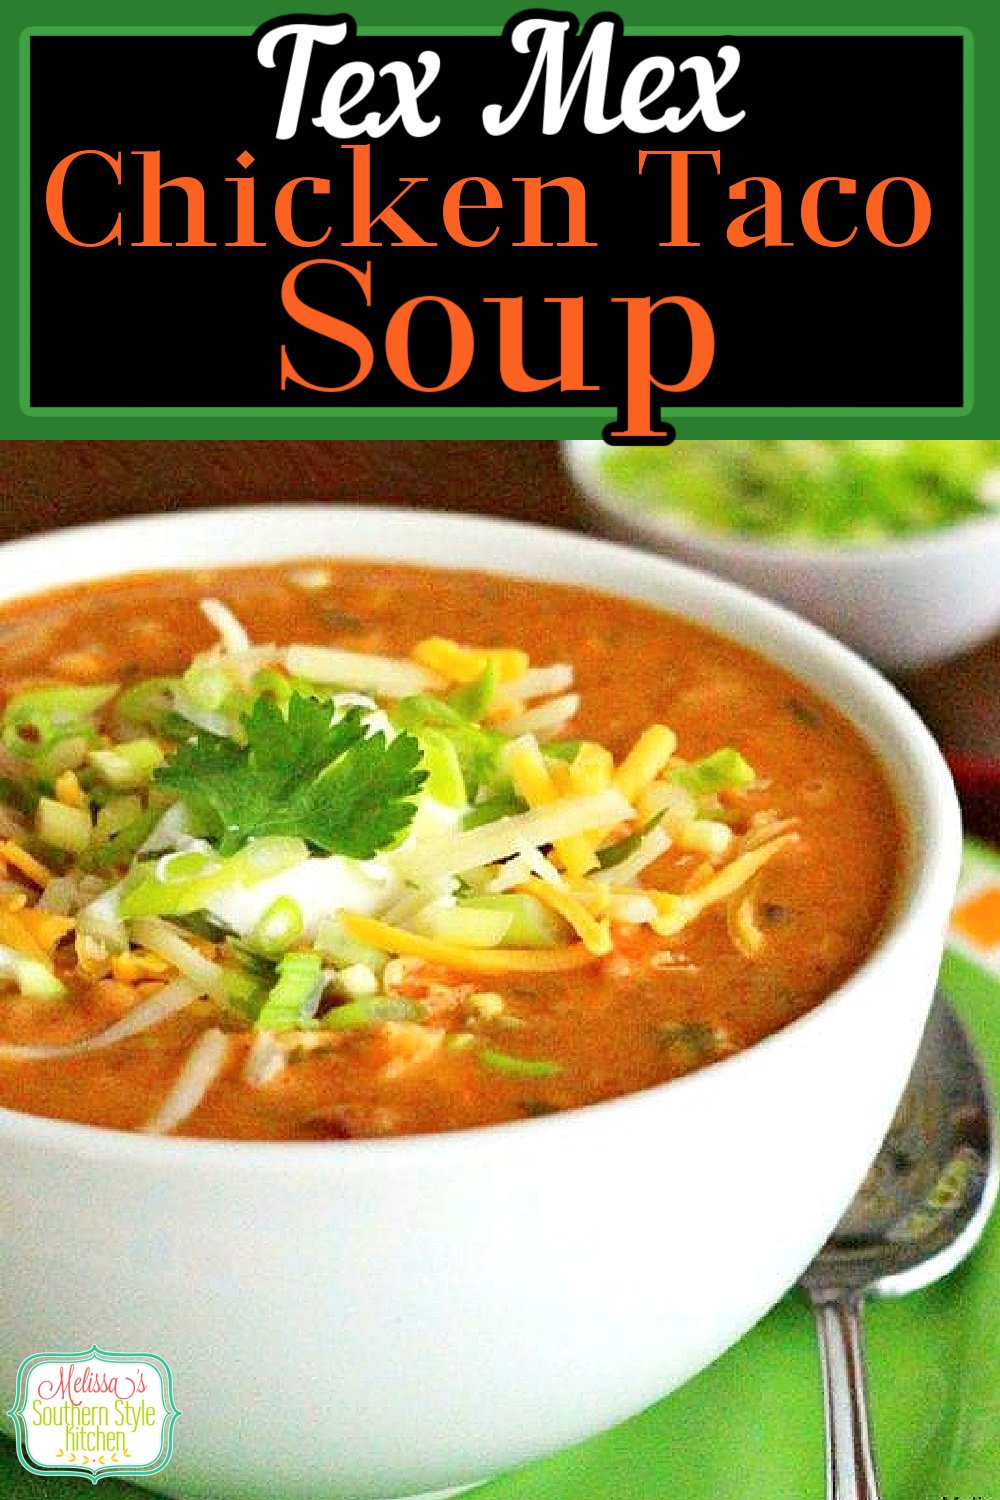 Cozy up to a warm bowl of Tex Mex Chicken Taco Soup topped with your favorite taco toppings #chickensoujp #texmex #chickentacosoup #tacosoup #souprecipes #easychickenrecipes #dinner #dinnerideas #southernfood #southernrecipes #mexican #southernfood #southernrecipes via @melissasssk